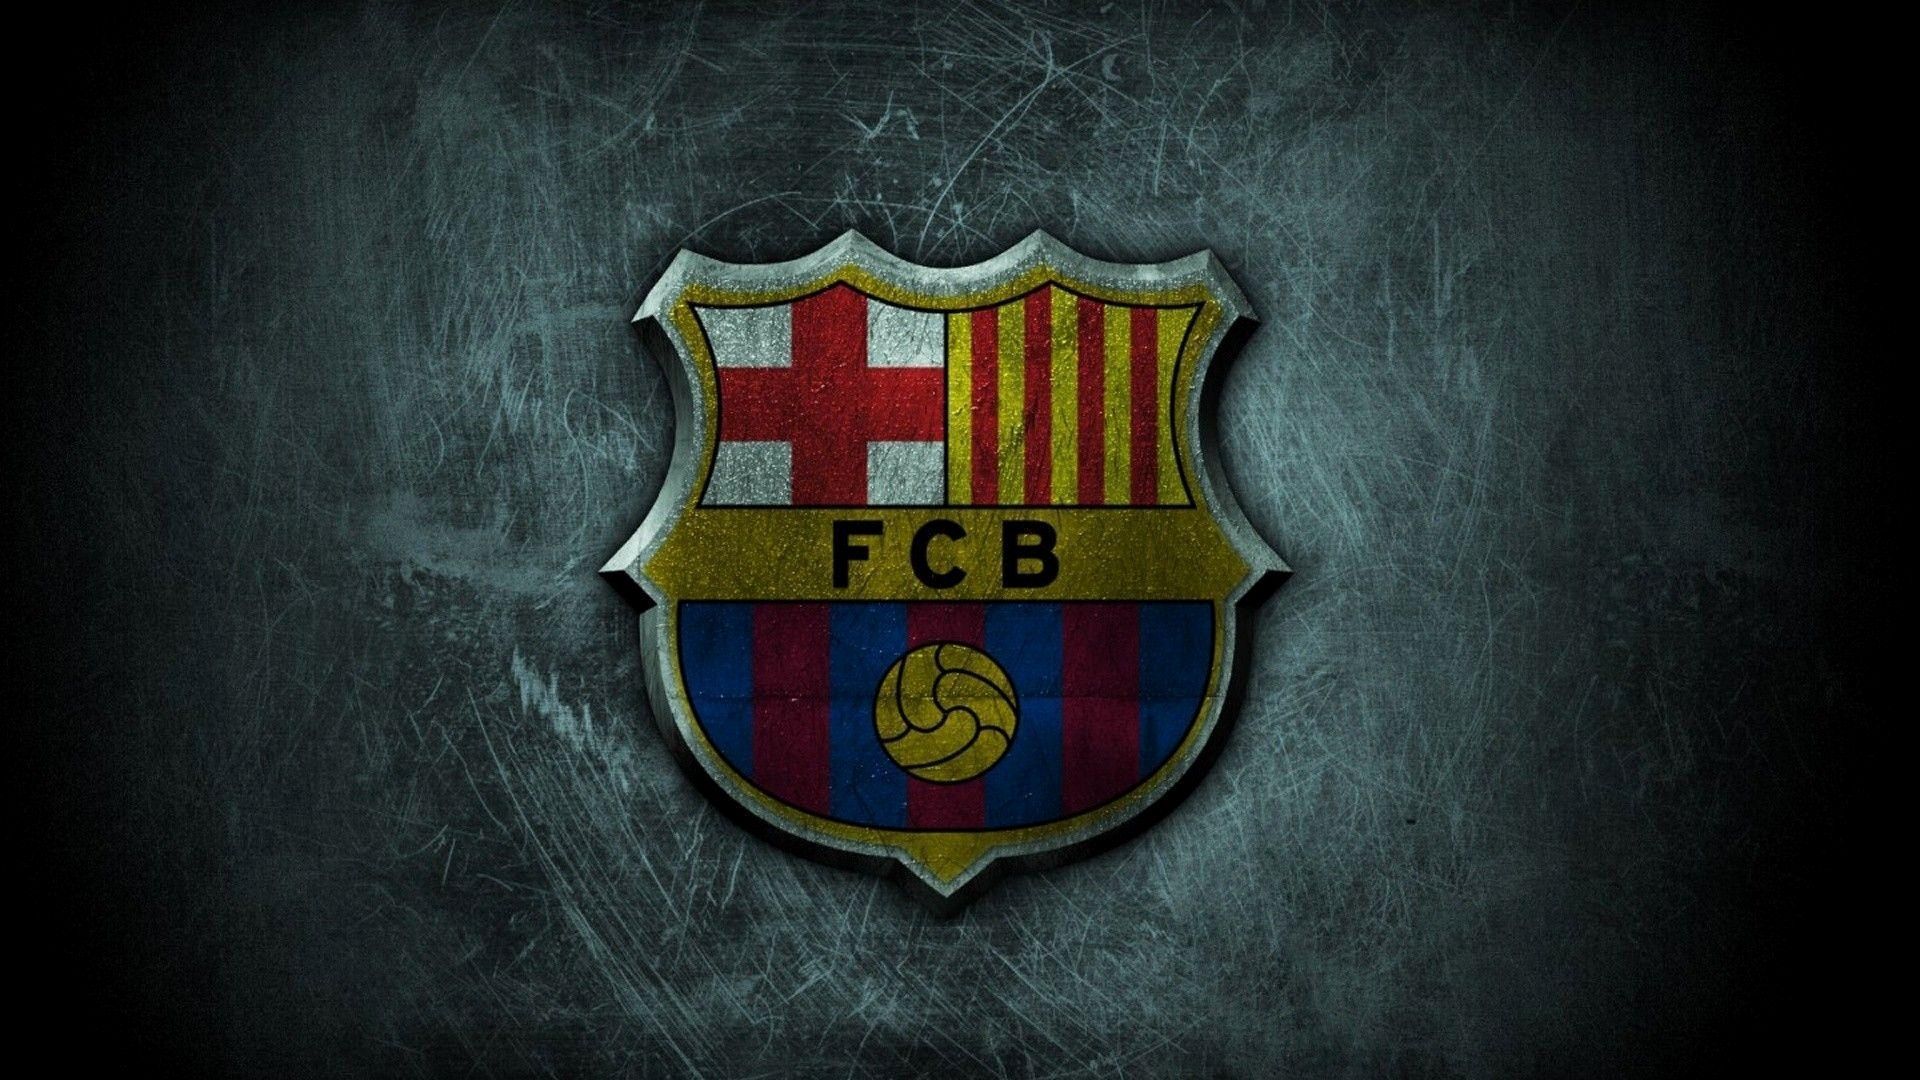 Unique Fc Barcelona Wallpaper This Week of The Hudson